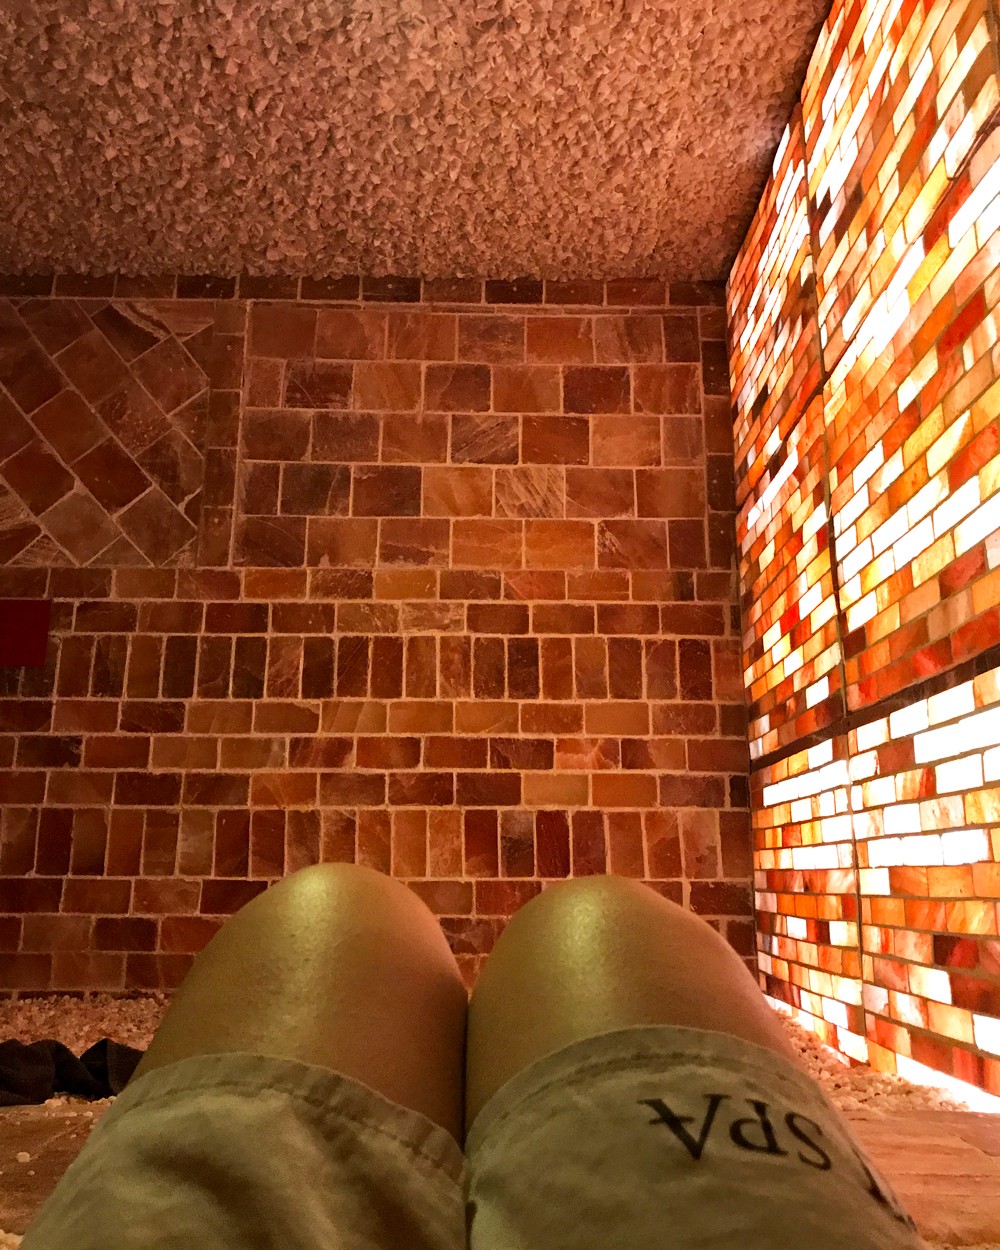 Wi Spa Salt Room Sauna - What to expect at a Korean spa in the US by popular Los Angeles travel blogger My Beauty Bunny